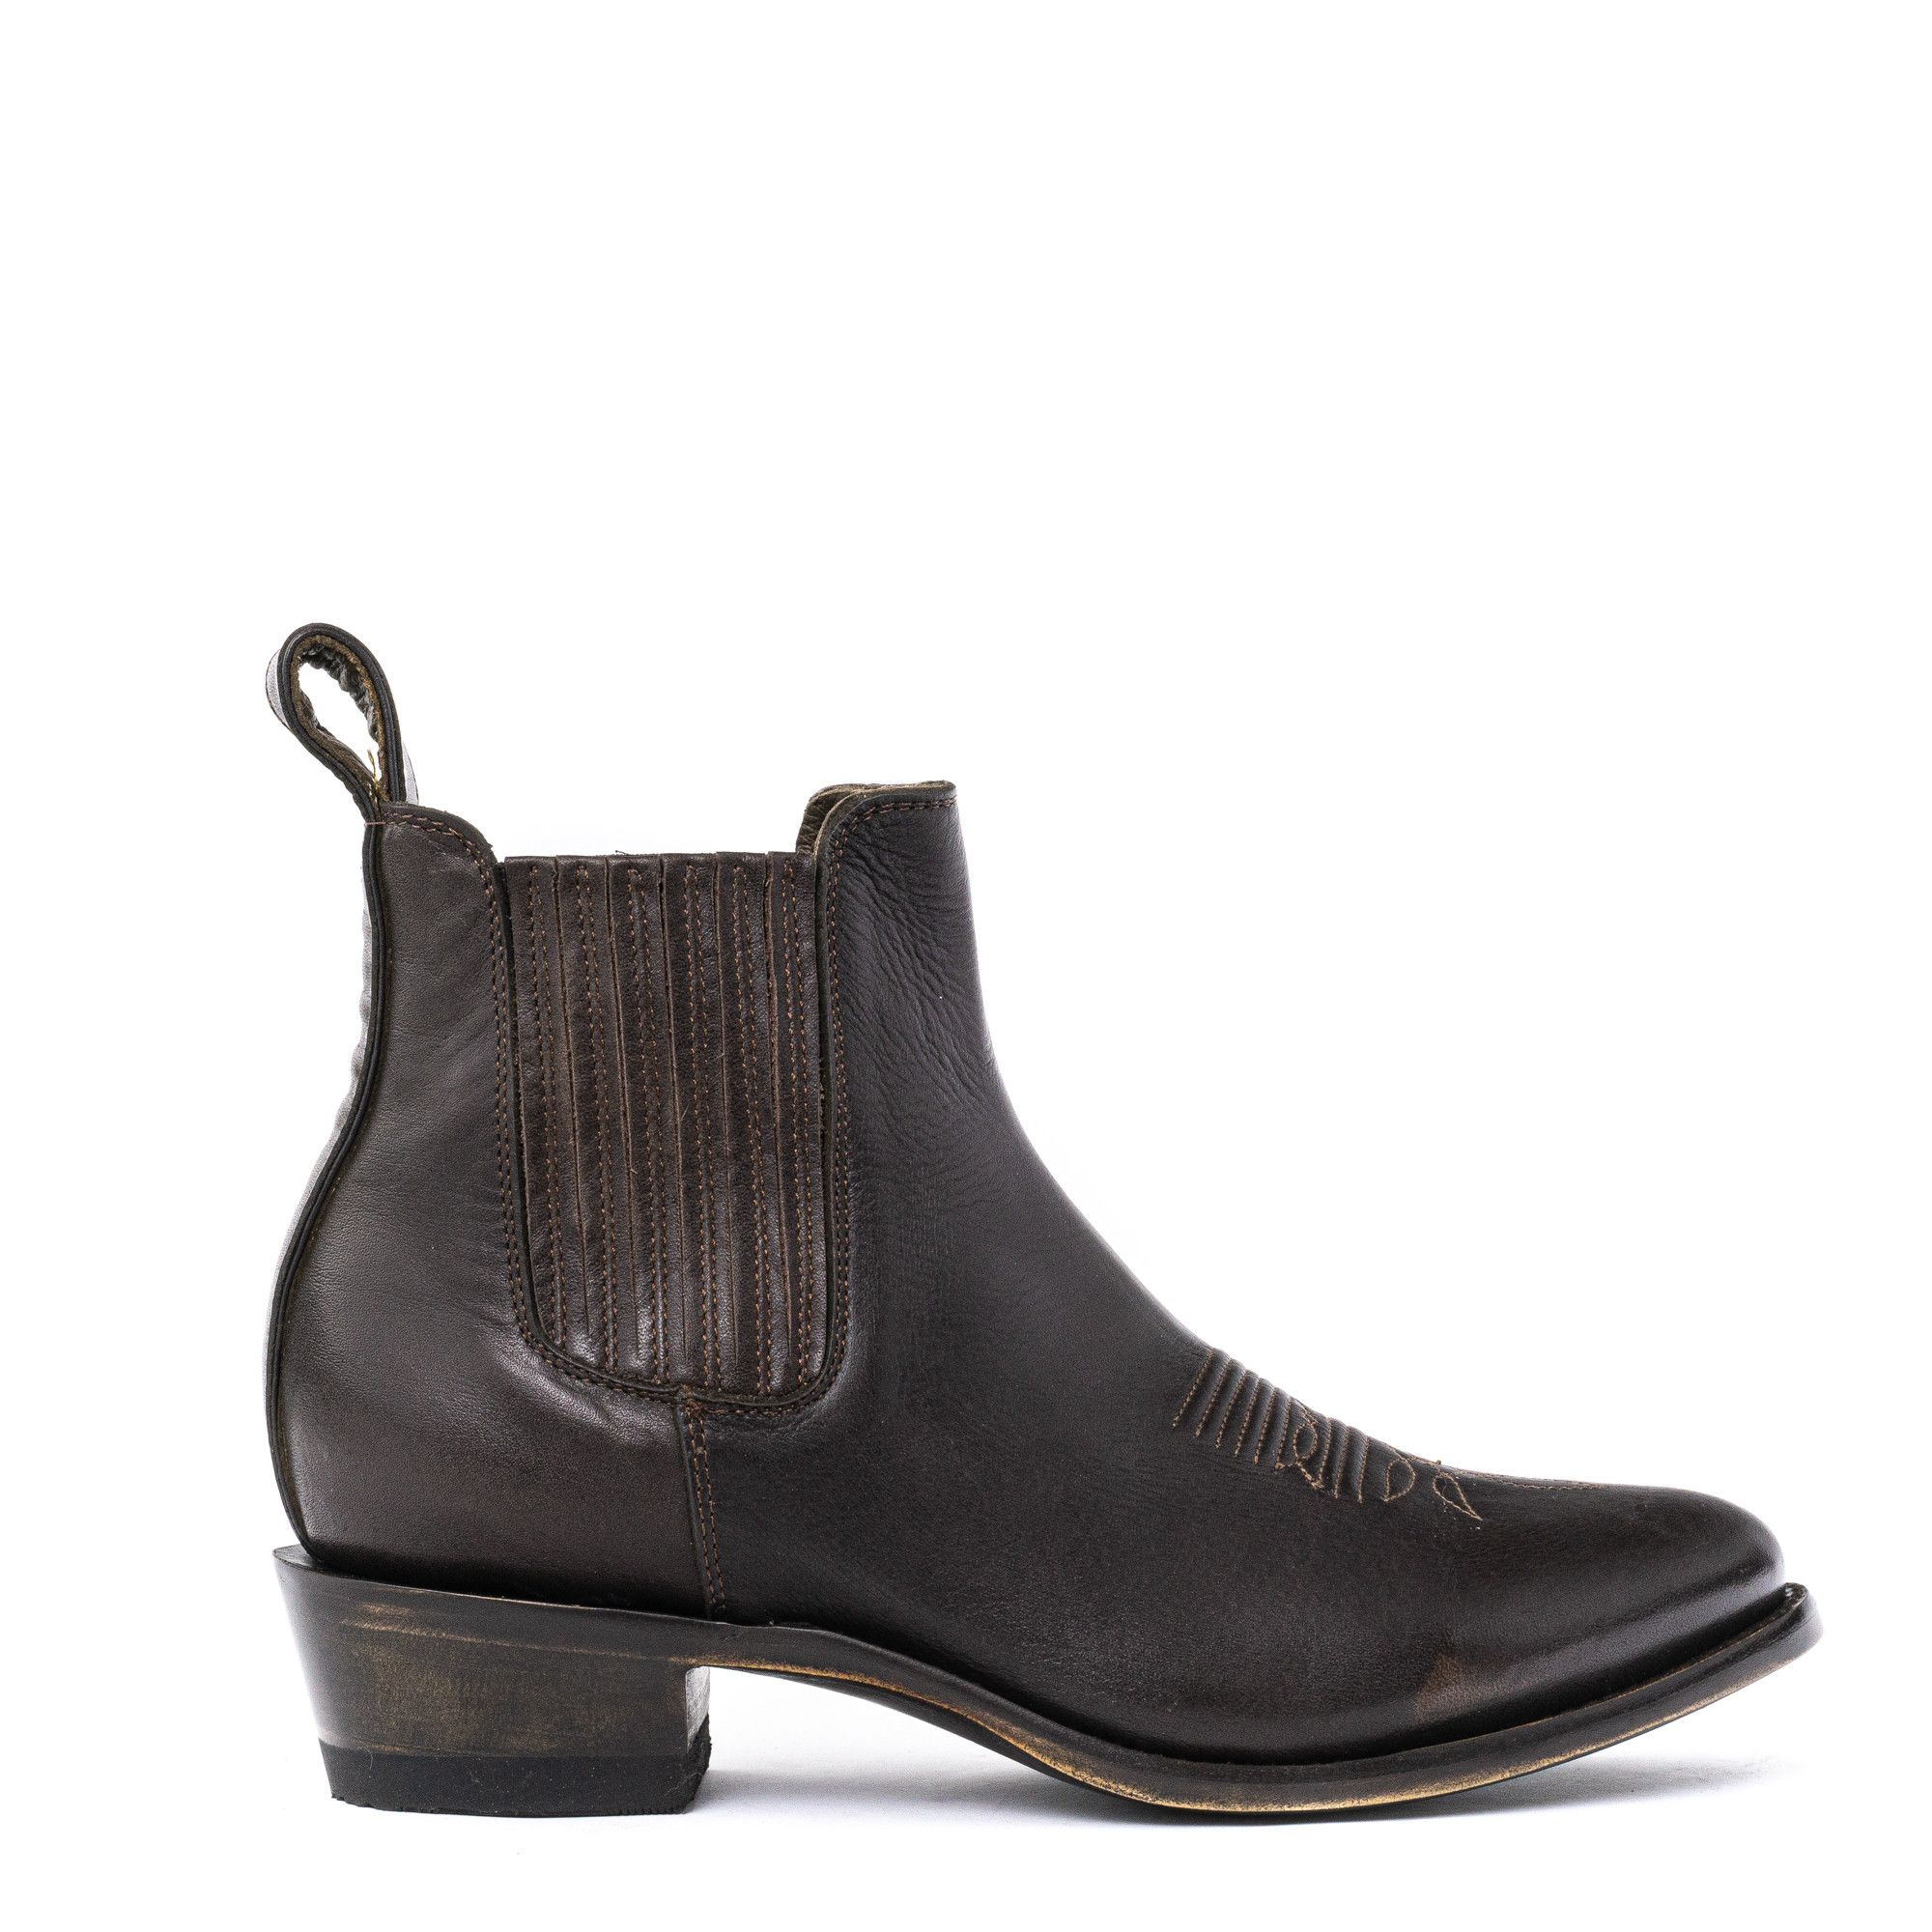 ESTUDIO BIS CHOCO RANCHEIRO ROUNDED TOE ANKLE BOOTS WITH COWBOY      STYLE STITCHING AND ELASTICIZED SIDES PANEL     Total heel 